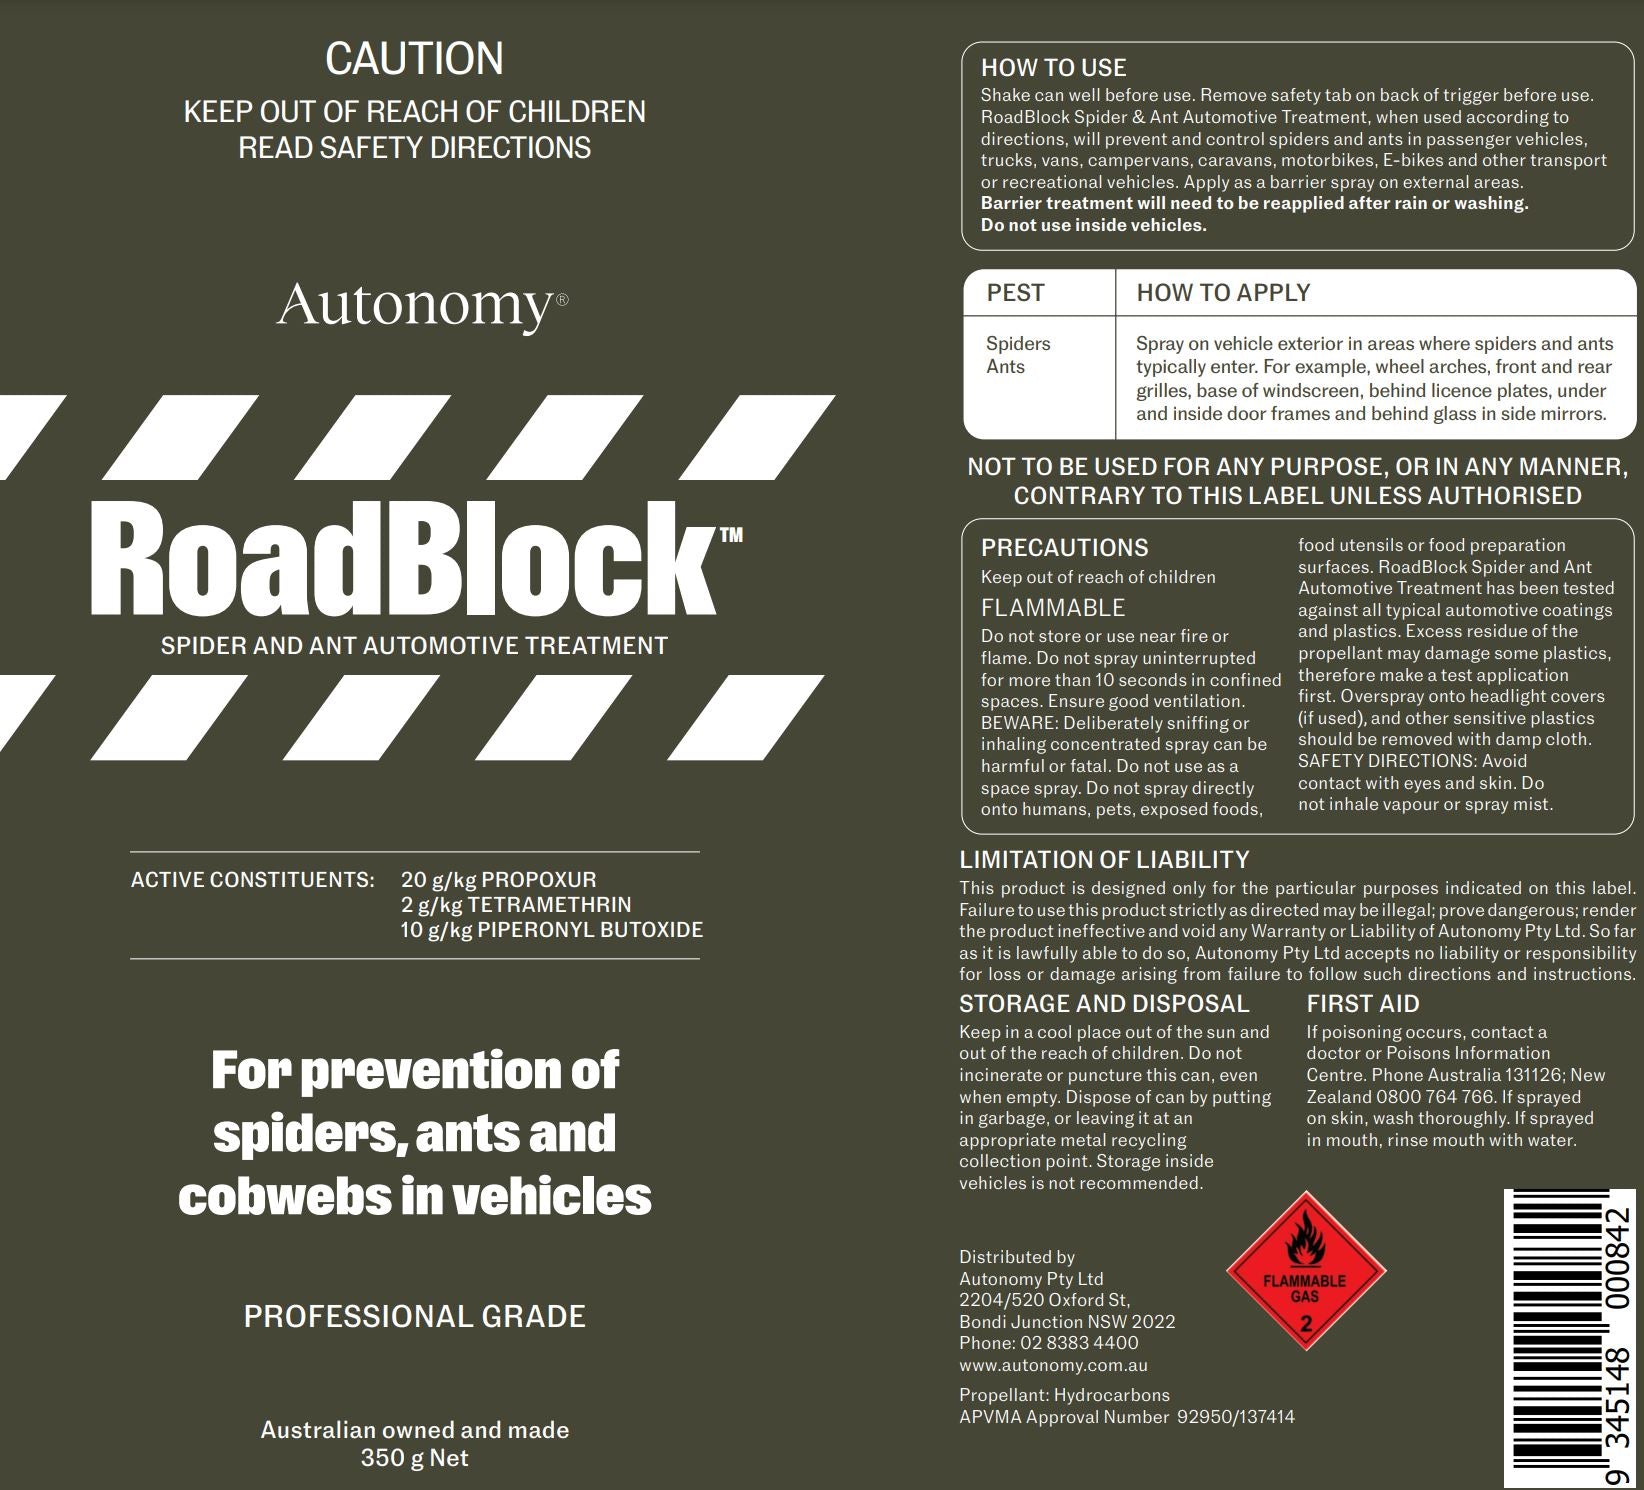 roadblock spray label flattened out so all contents are displayed on screen